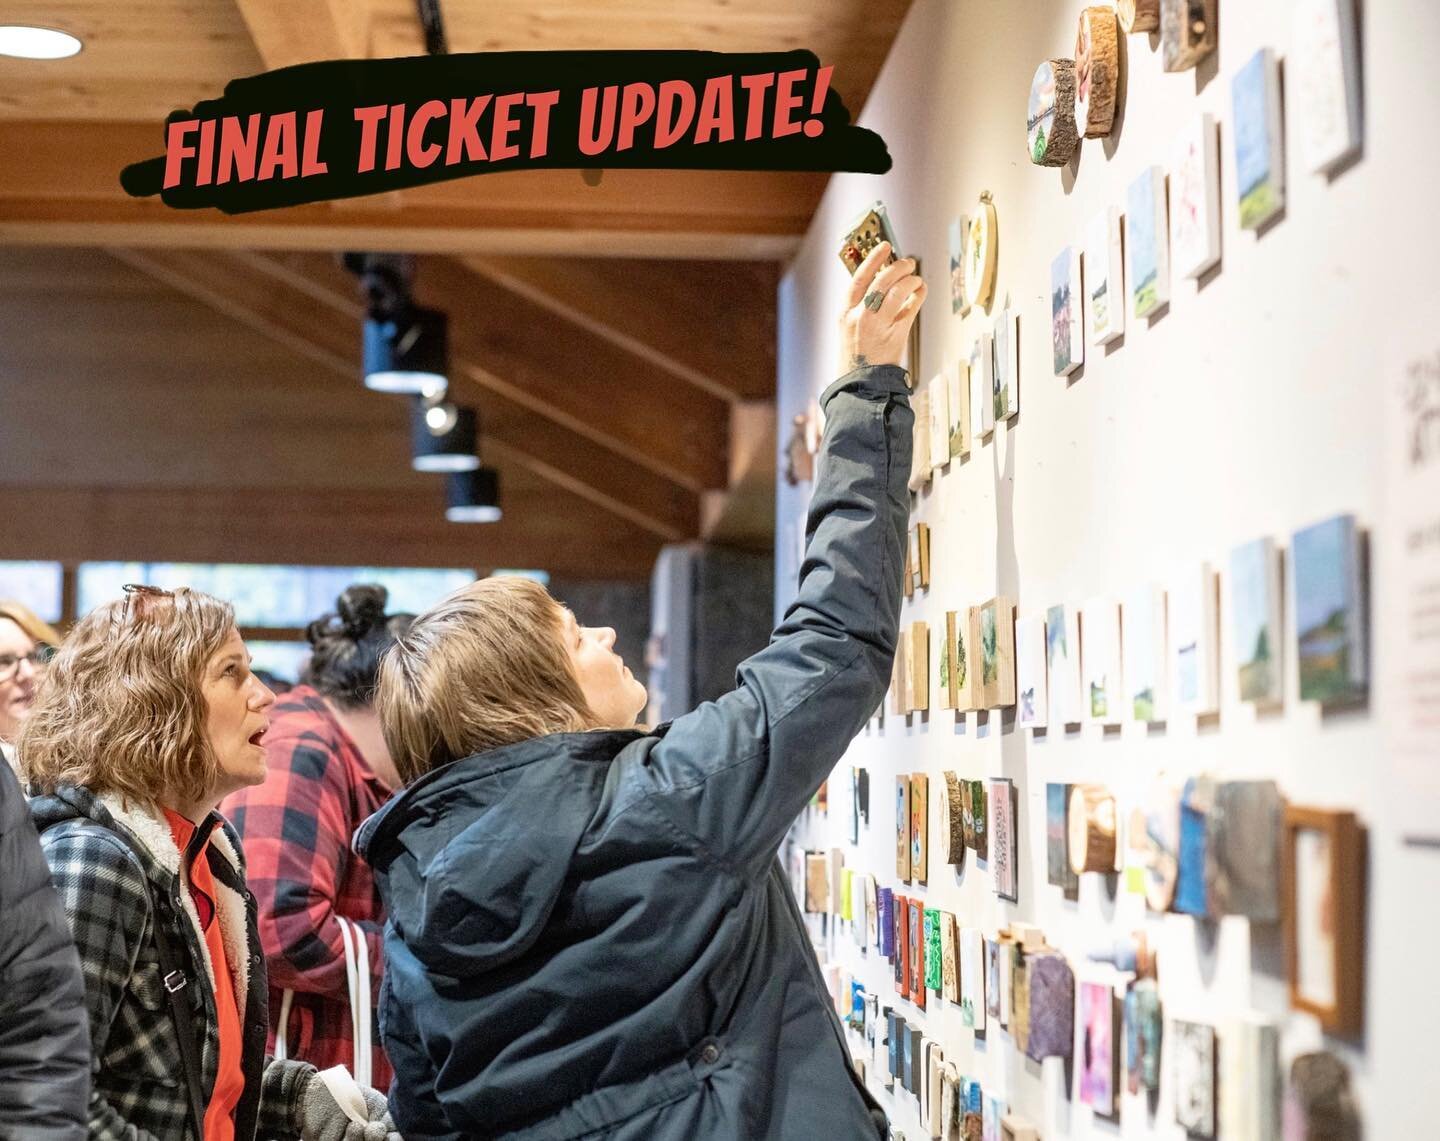 The final round of opening night tickets go on sale tomorrow, Tuesday the 3rd, at 7am. This batch gets you into the show at 7:30 pm. No more will be released, and none will be available at the door. So if you want to be grabbing art off the wall like